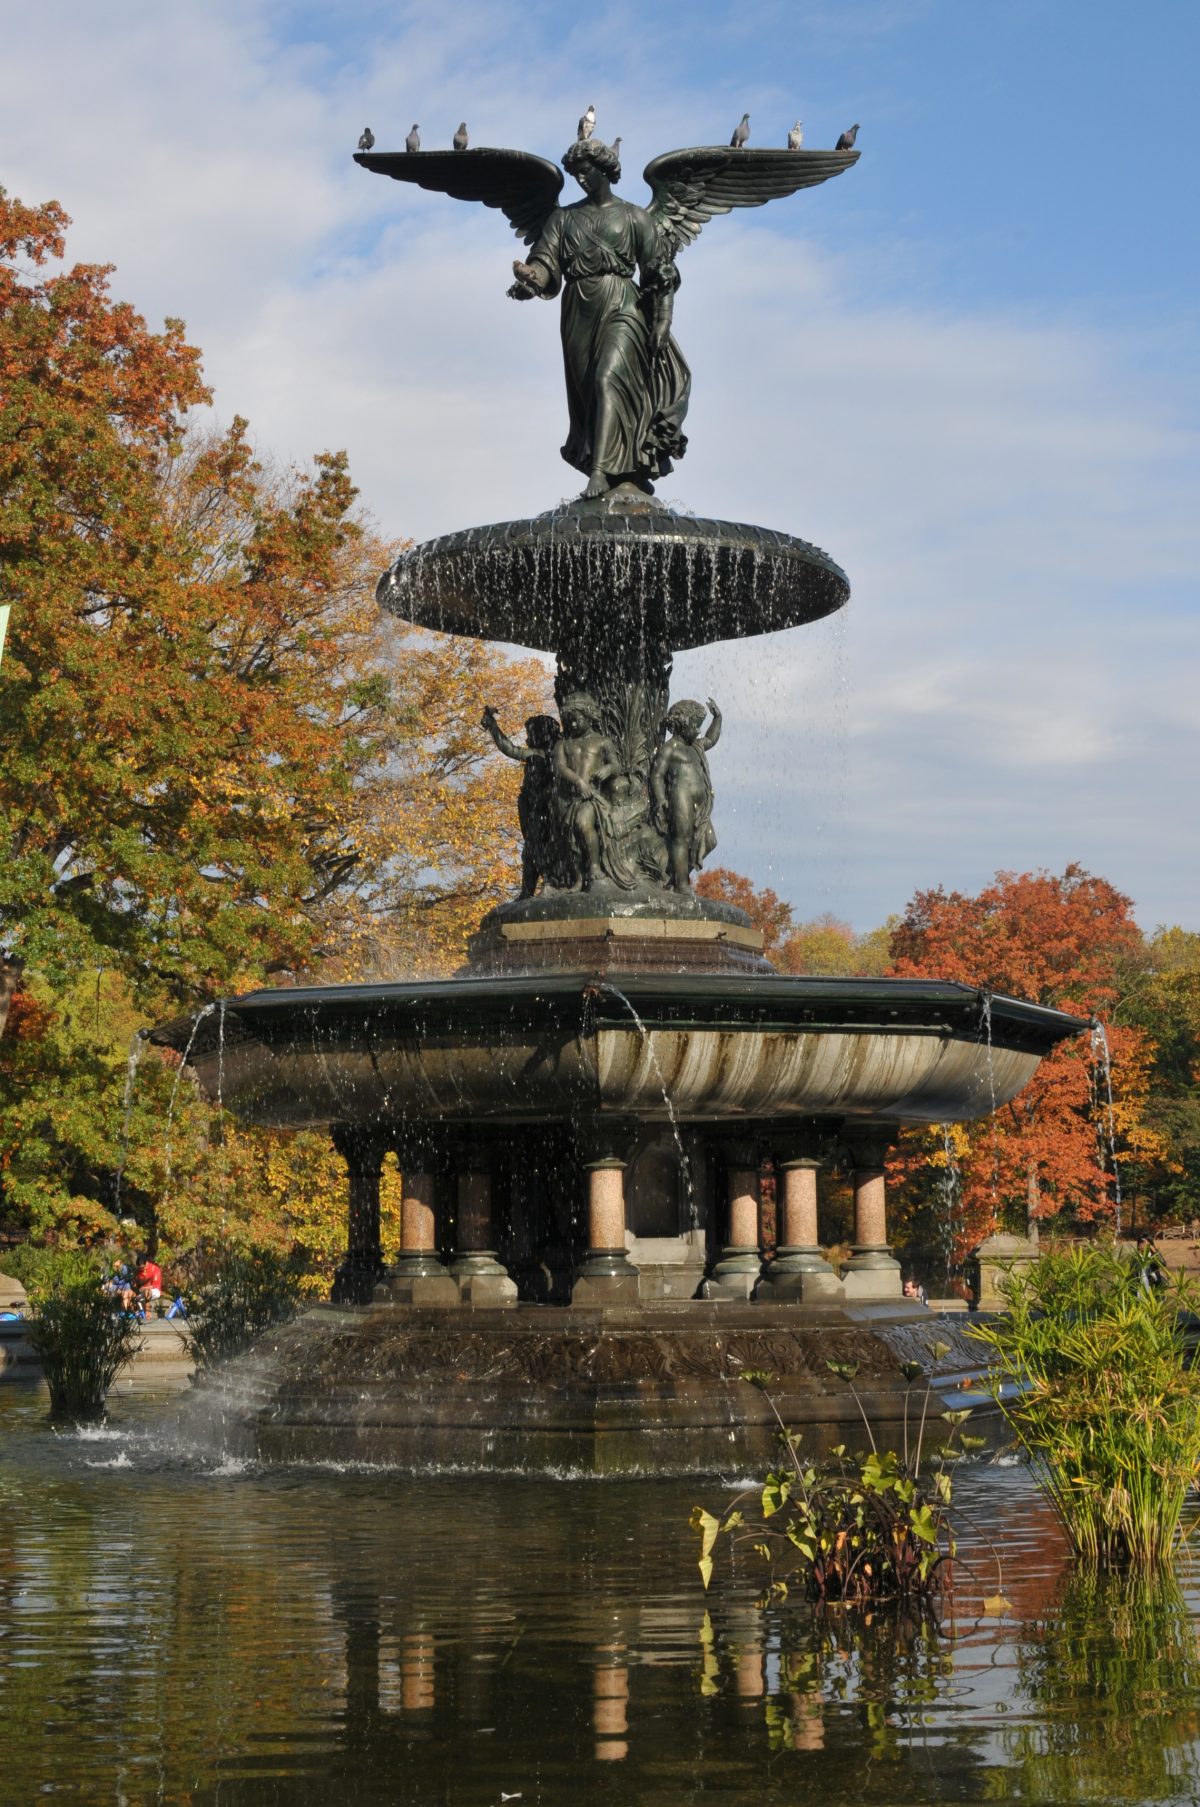 statues of central park Bethesba fountain